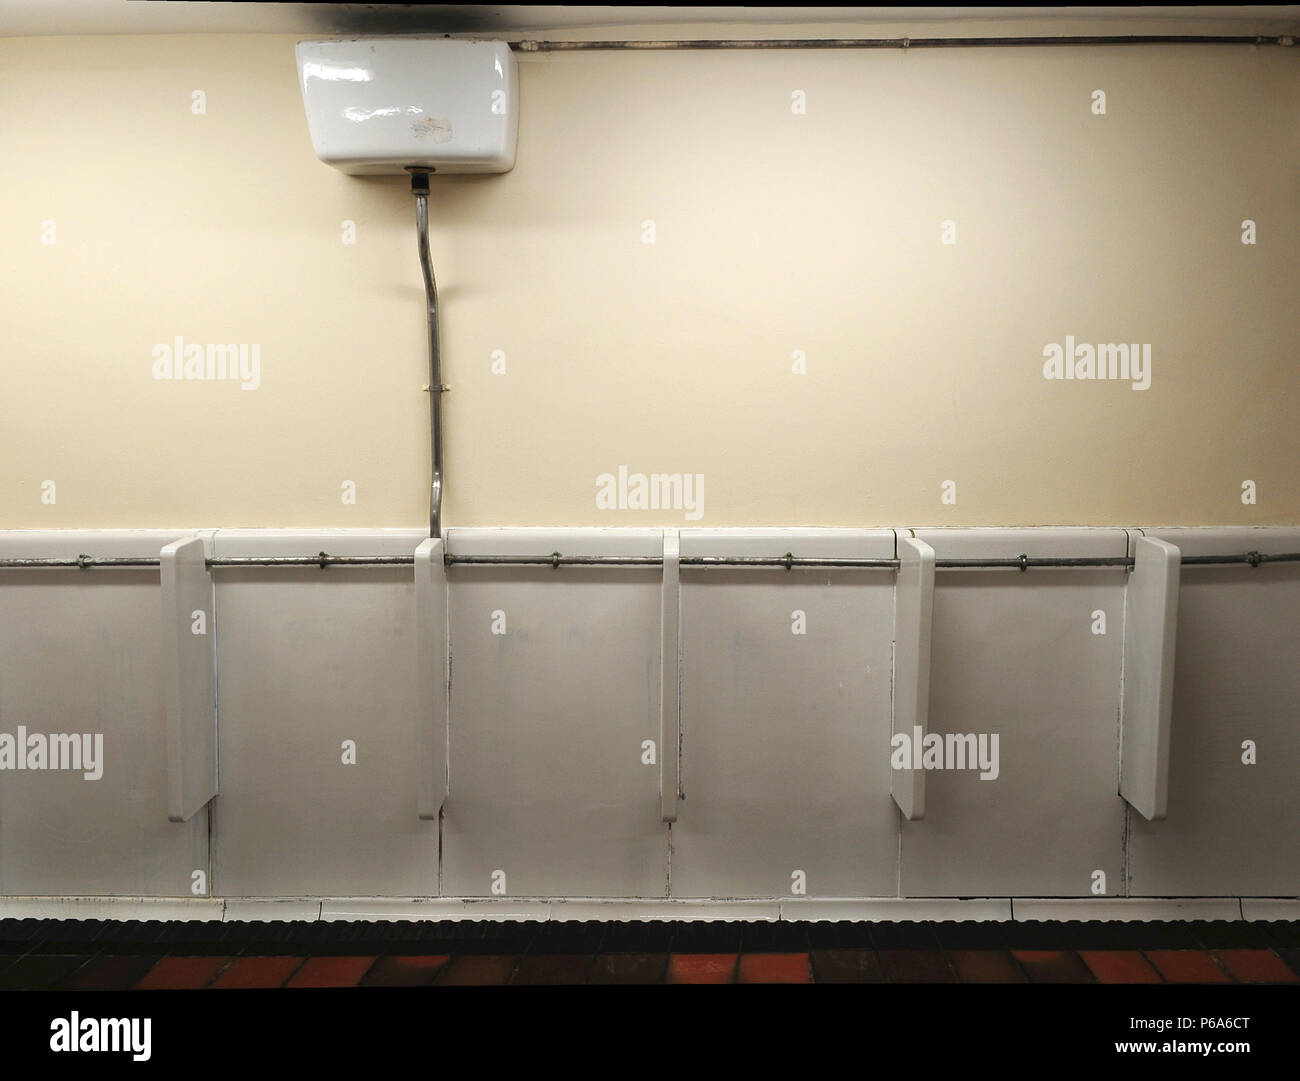 A row of gents urinals in a public lavatory Stock Photo